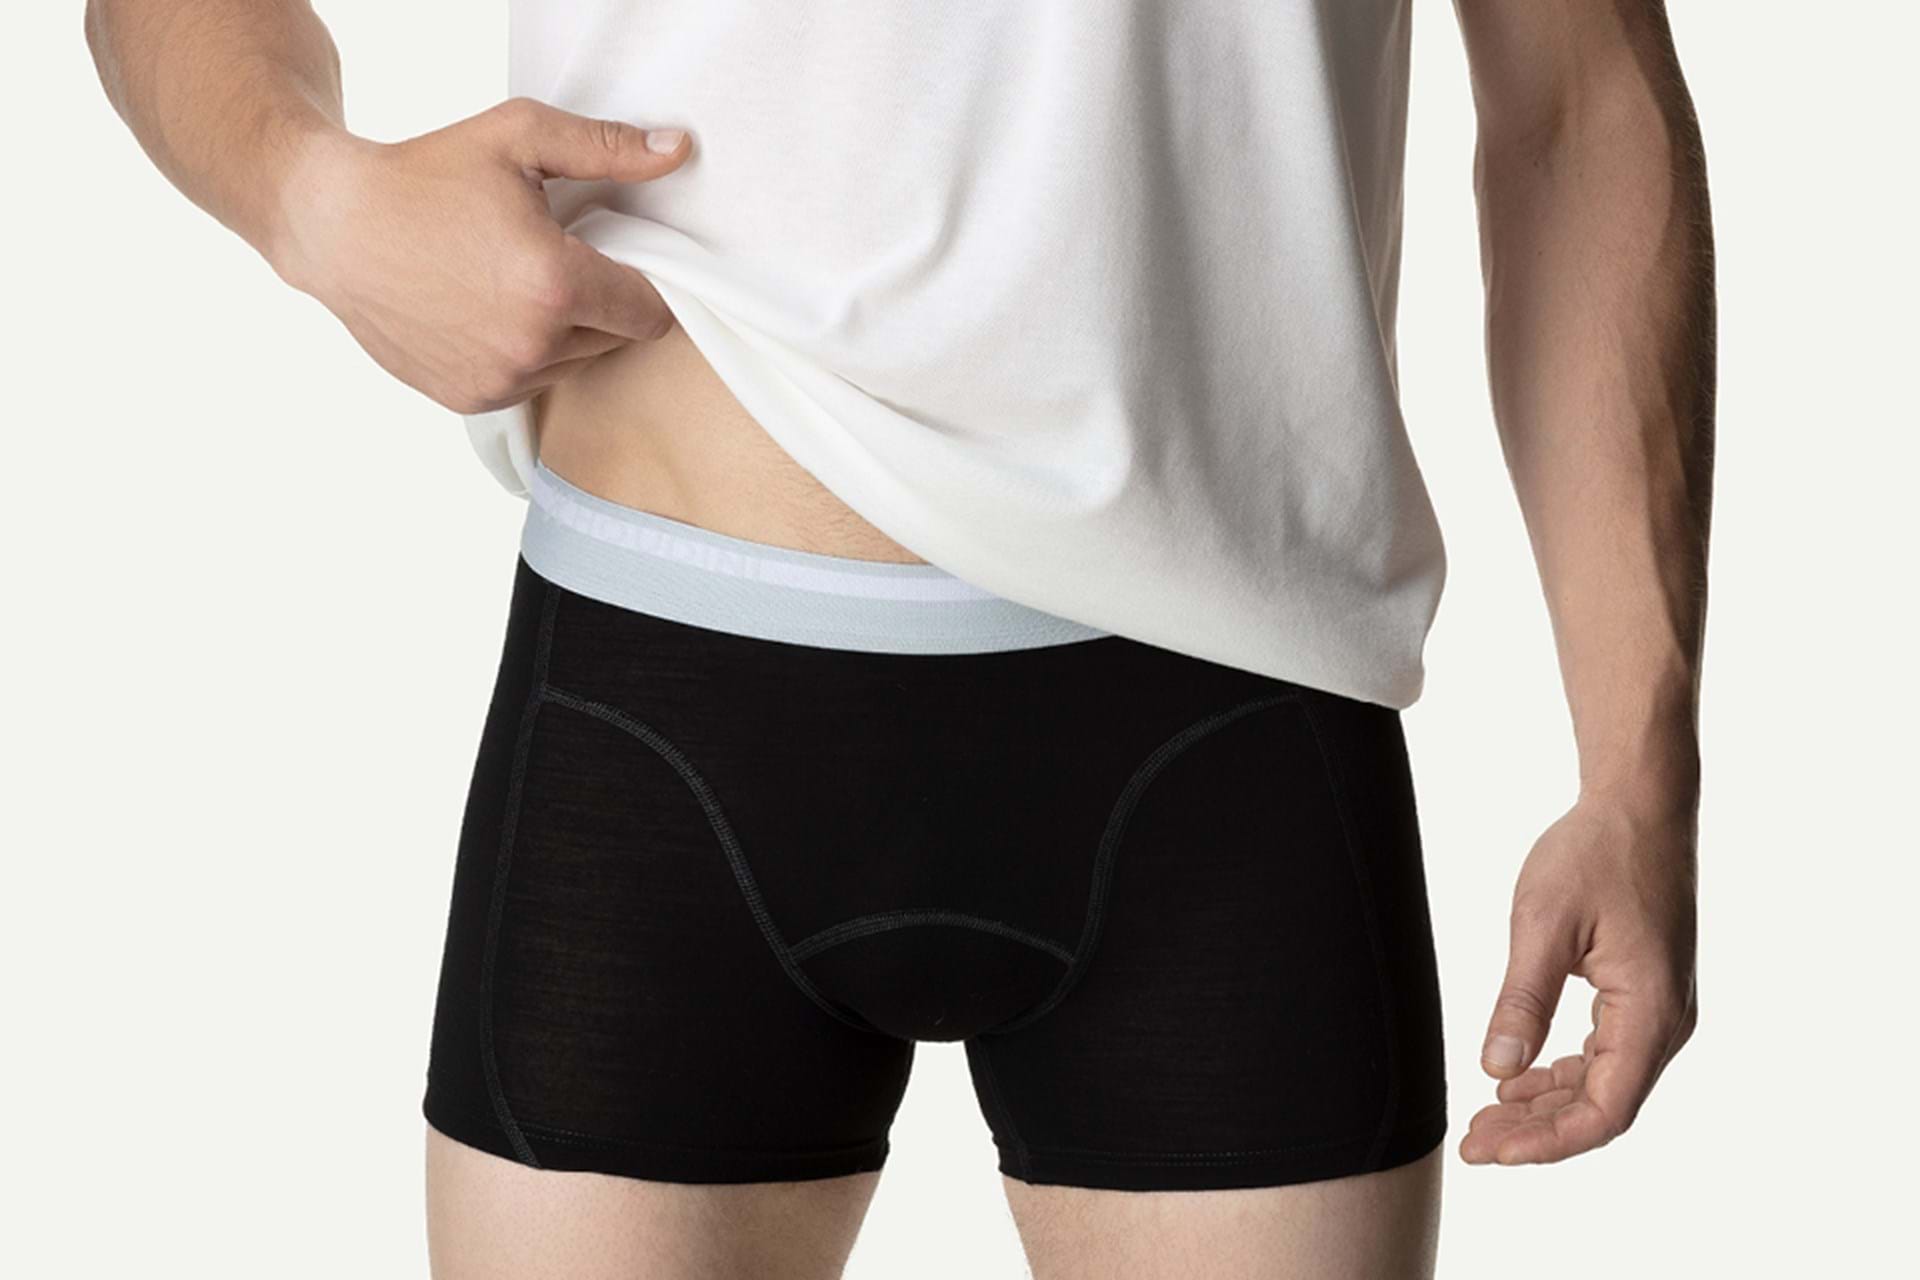 Underwear that allows for movement and heat control during your activity. Merino wool or synthetics ... When it comes to your privates, we have you covered.